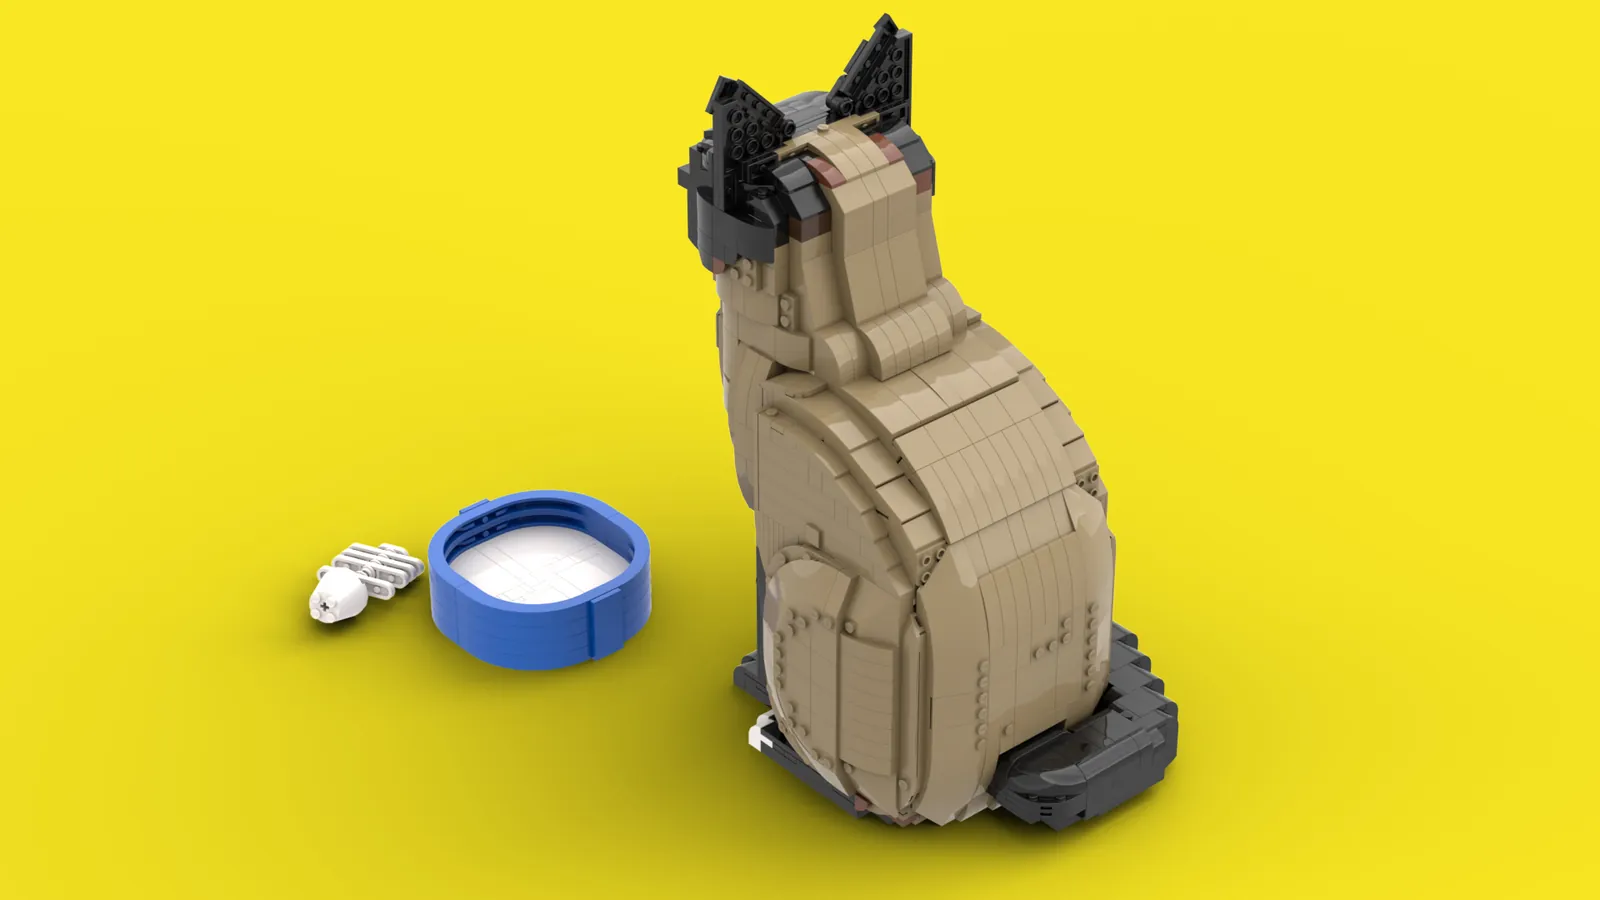 “Cat” commercialized with Lego (R) ideas 2022 3rd 10,000 support design introduction